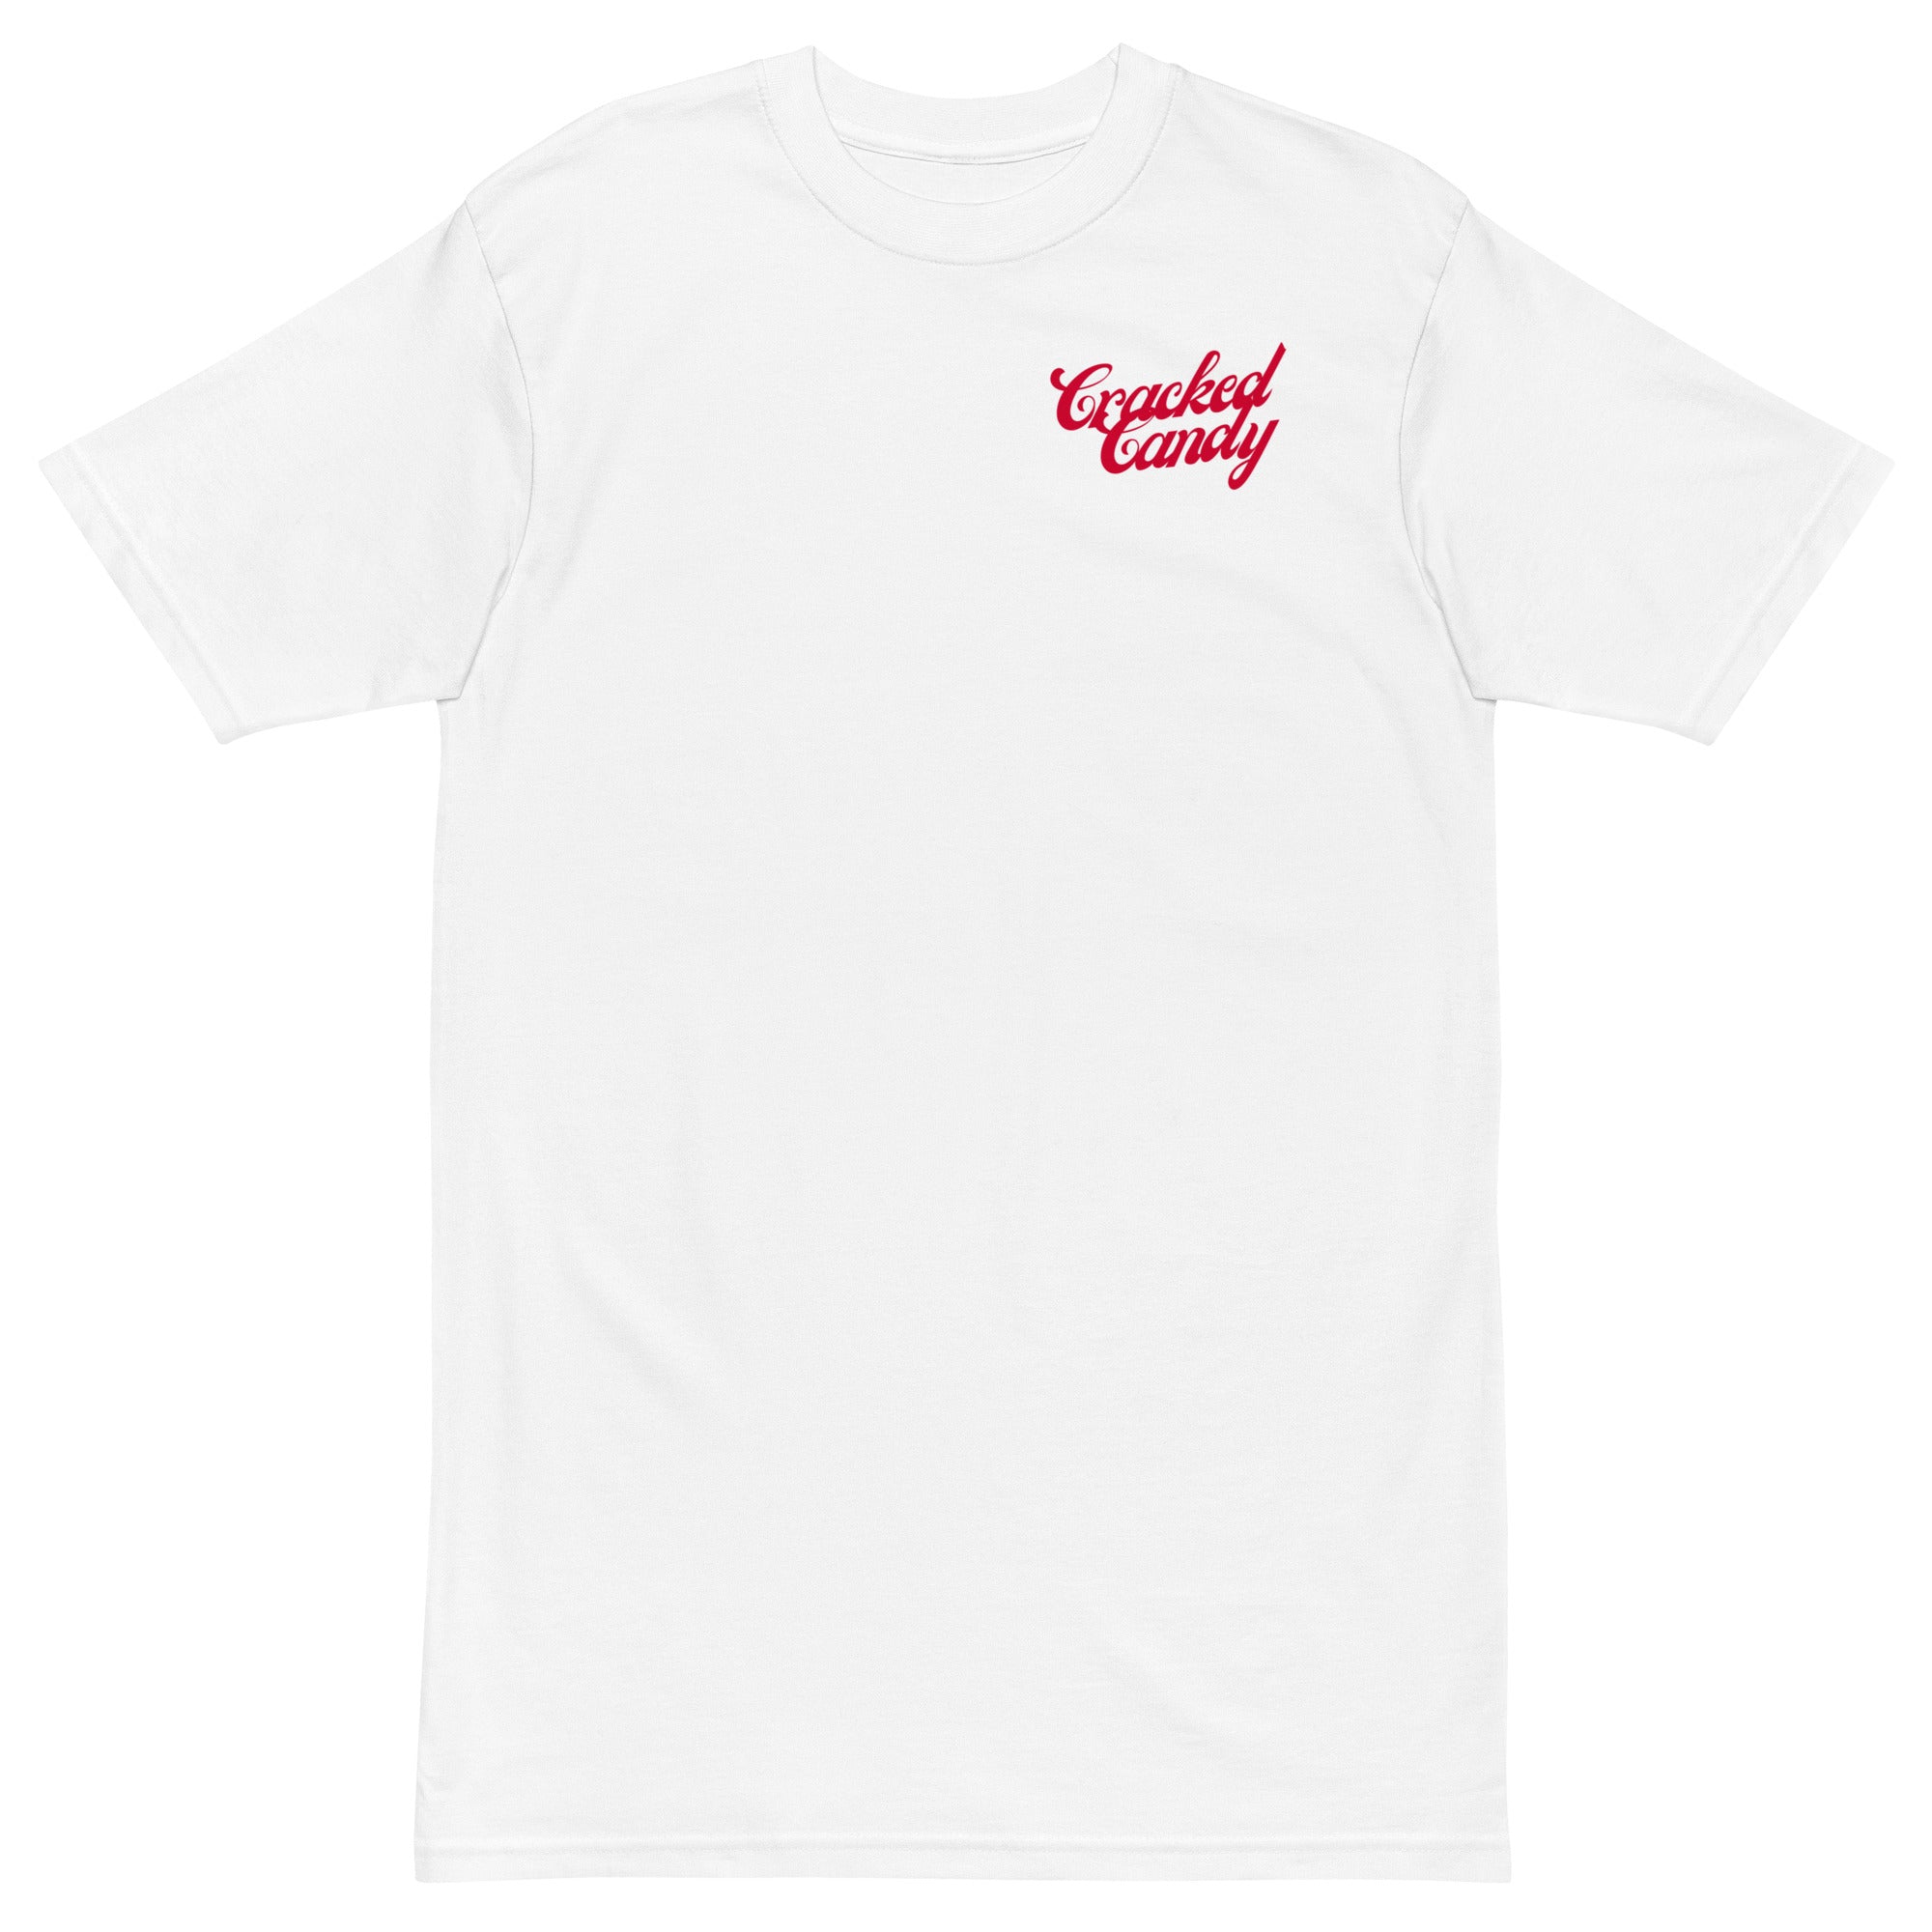 Cracked Candy Thefted Tee